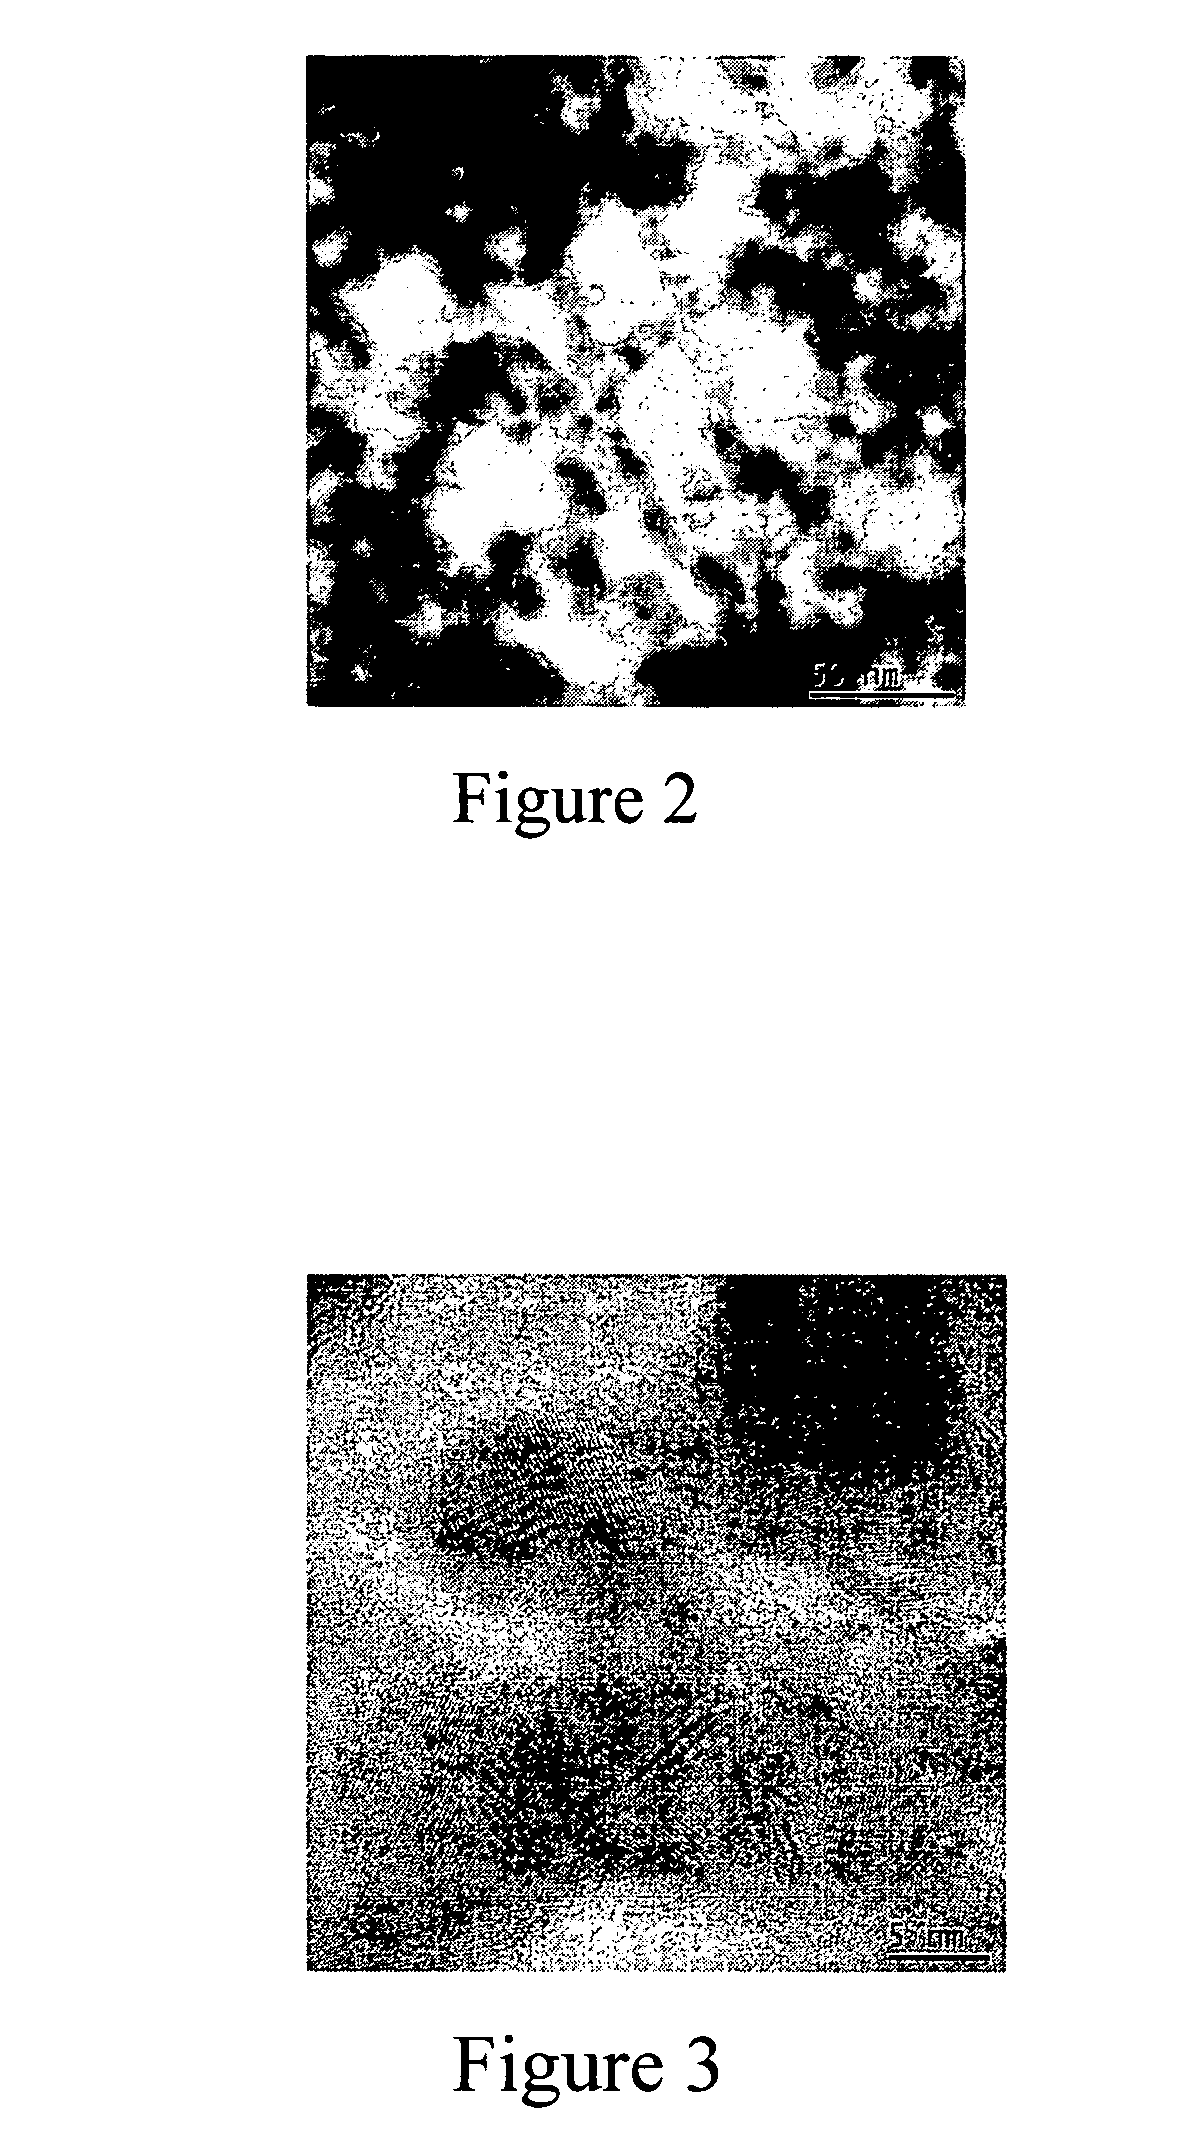 Method of making nanostructured lithium iron phosphate-based powders with an olivine type structure